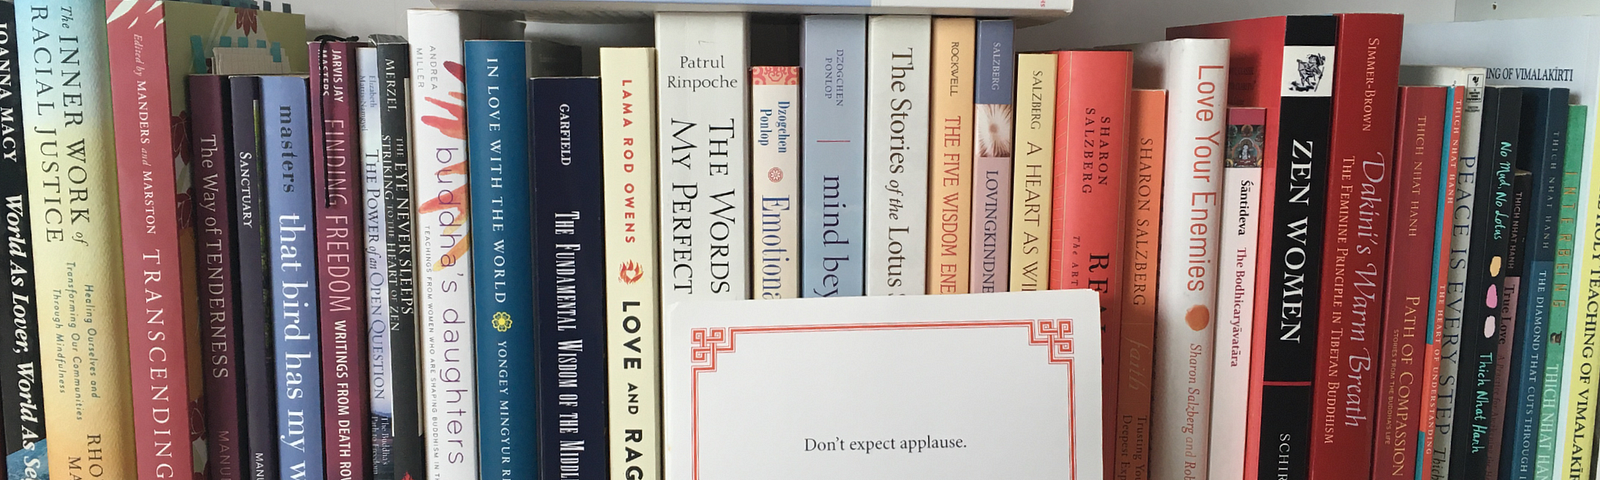 The 59th Lojong slogan card, “Don’t expect applause”, sits on a bookslef surrounded by many Buddhist books, contemporary, classic, and academic.